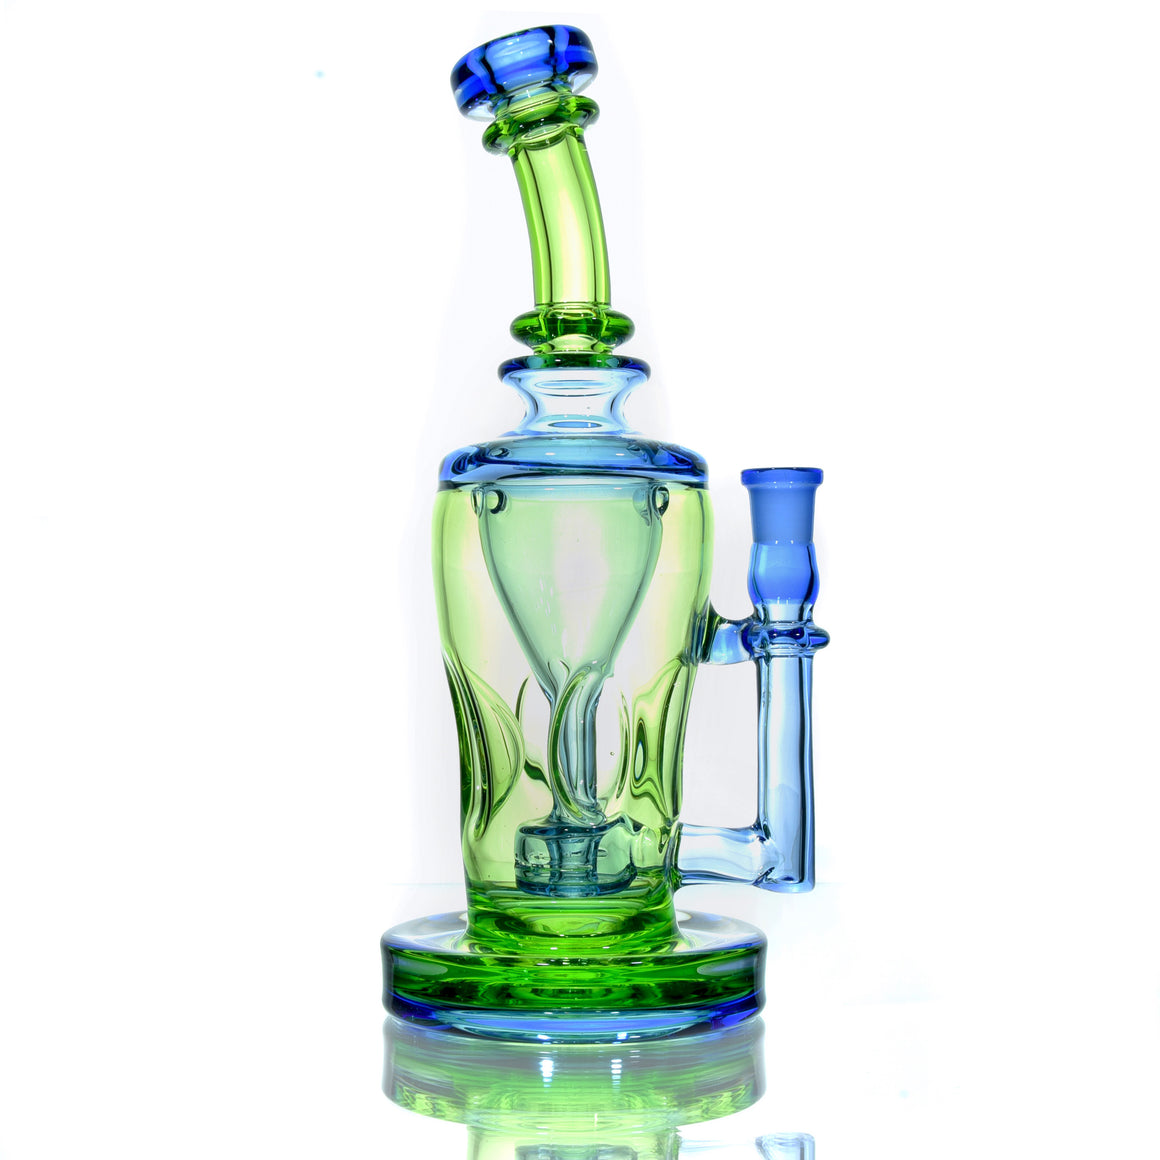 Full-color Double-uptake Tornada Recycler - Haterade/Blue Dream - 14mm Female